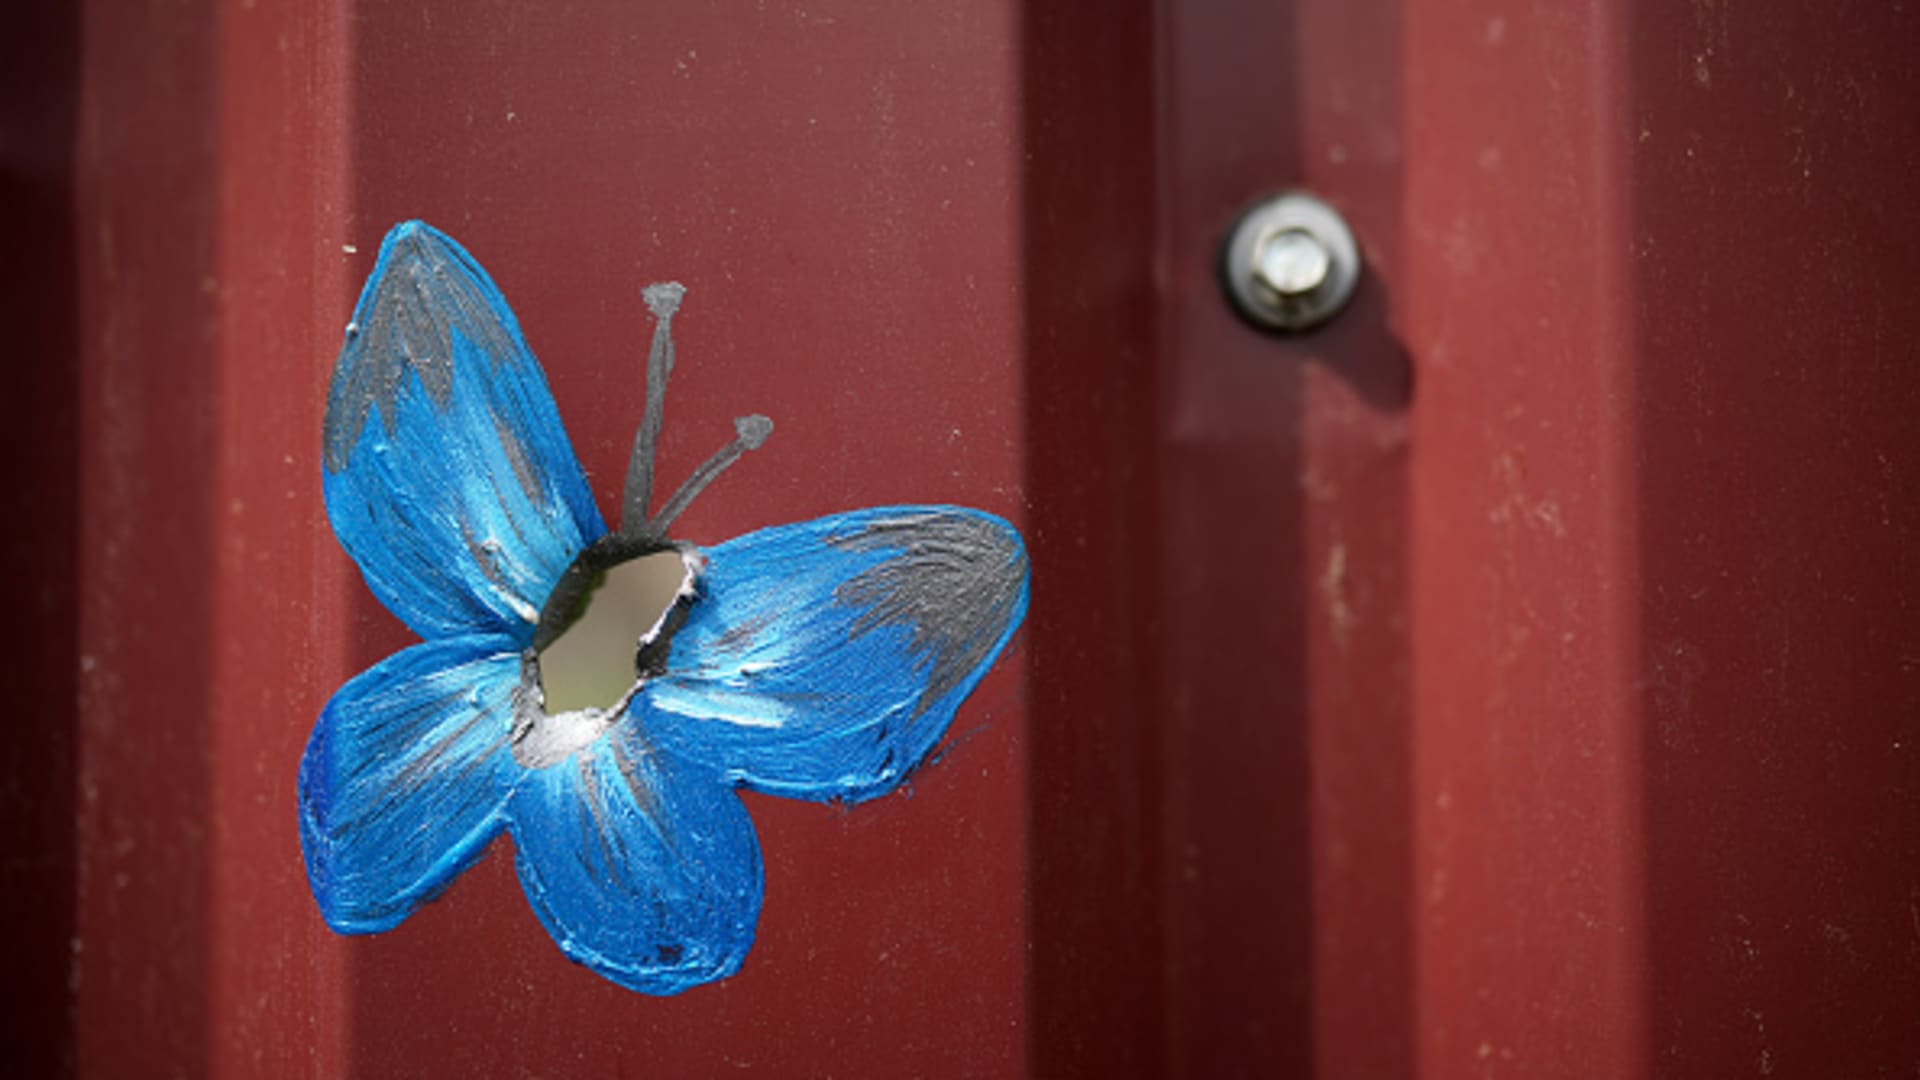 A butterfly painted around bullet and shrapnel holes by Canadian artist Ivanka Siolkowsky in the war torn suburb of Bucha on May 23, 2022 in Bucha, Ukraine. 